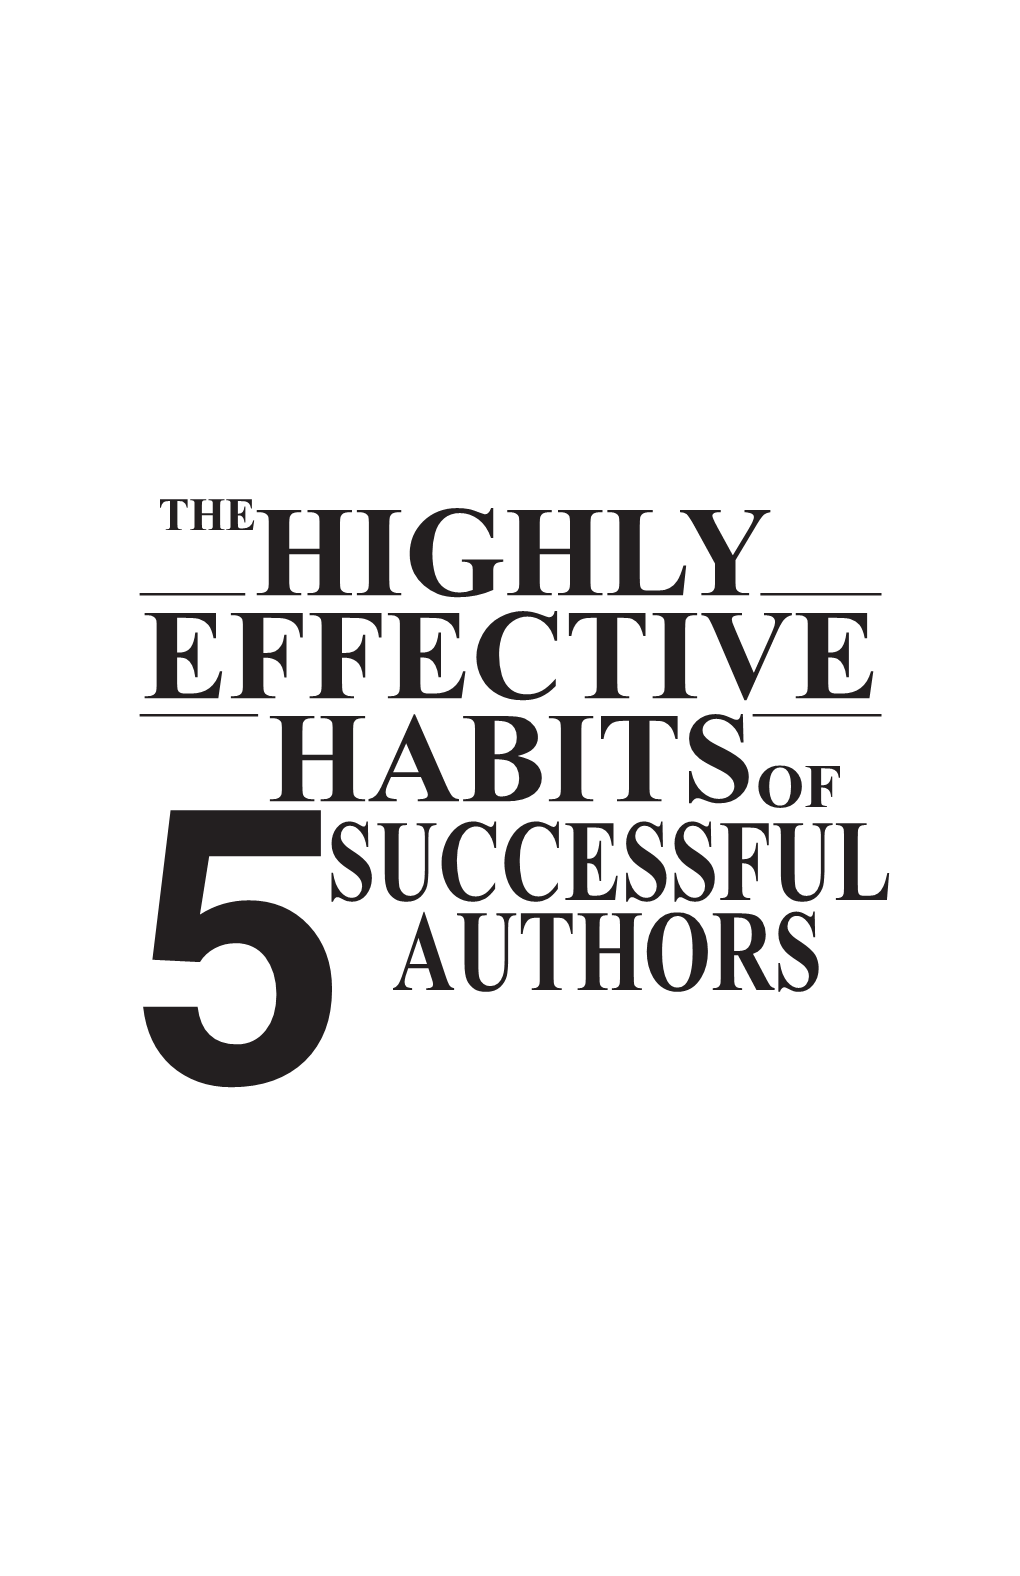 Highly Effective Habitsof Successful 5 Authors